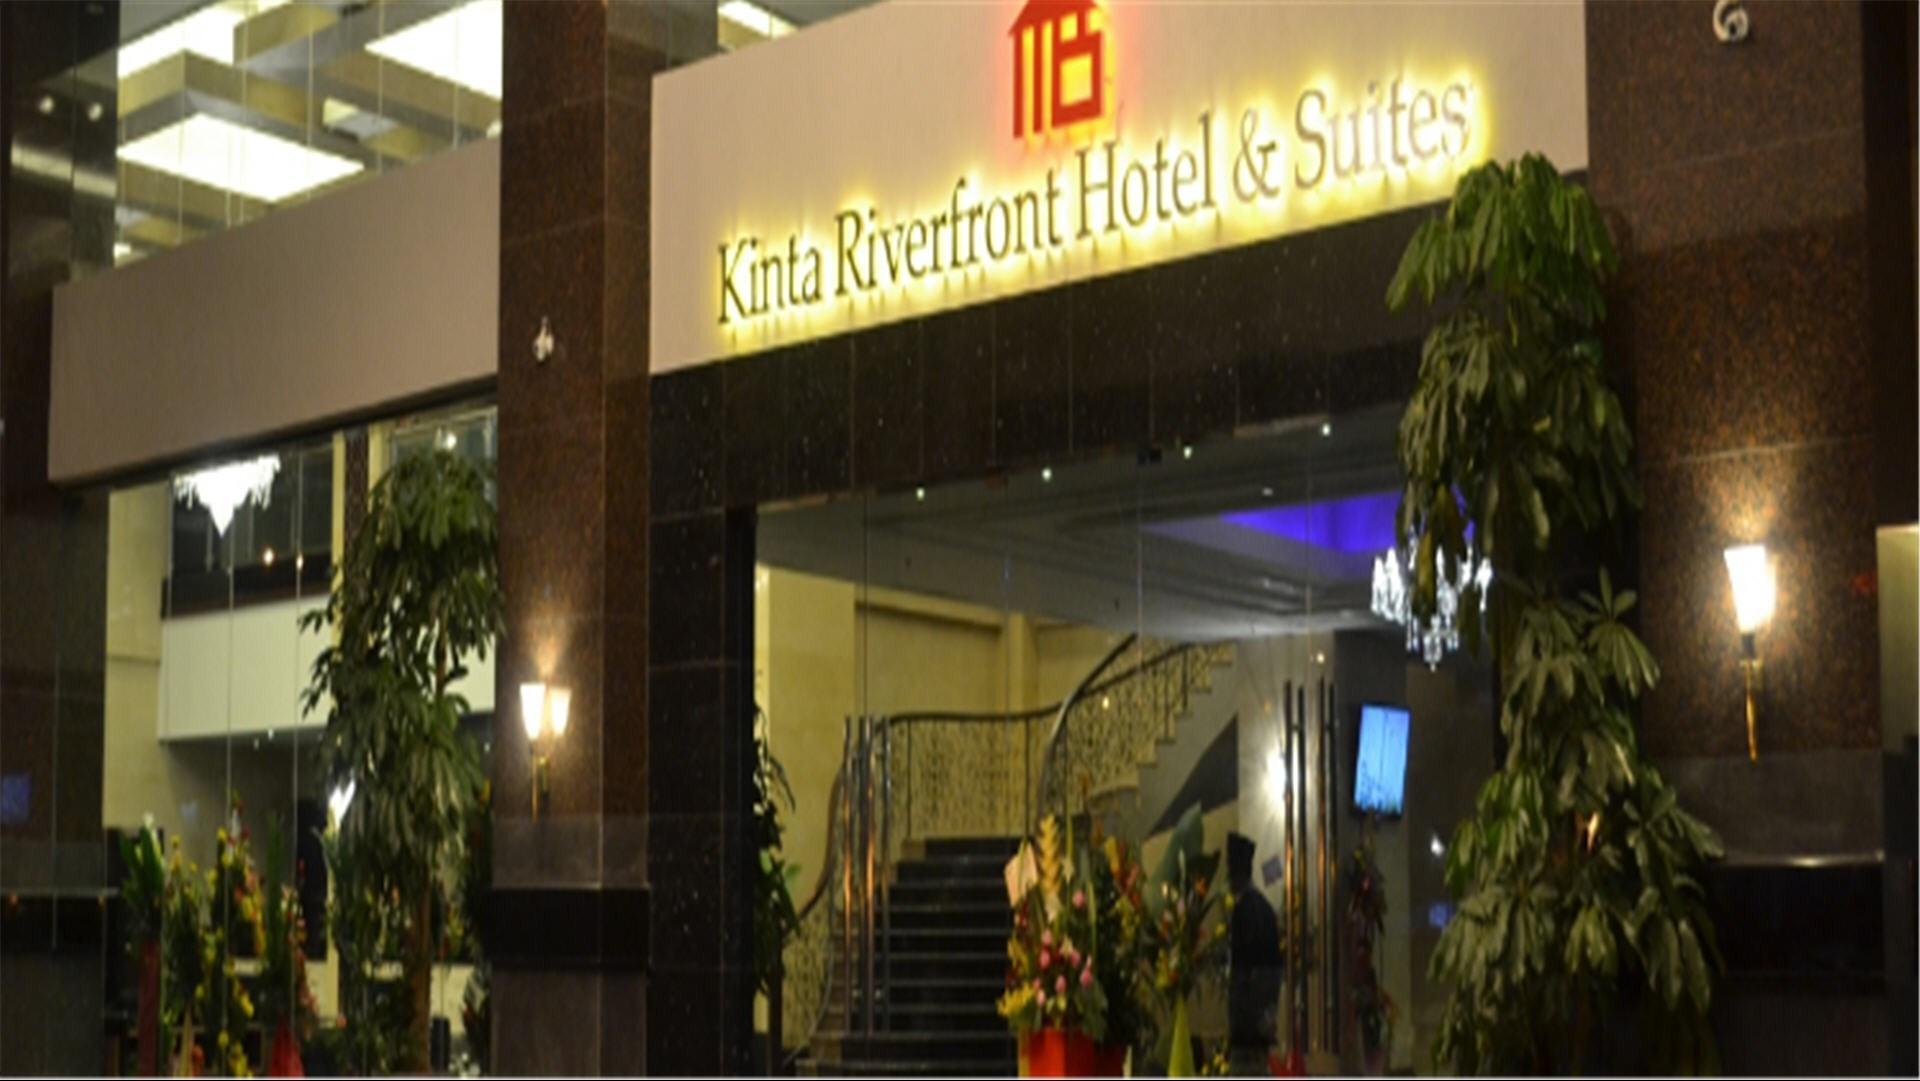 Kinta Riverfront Hotel & Suite in Ipoh, MY